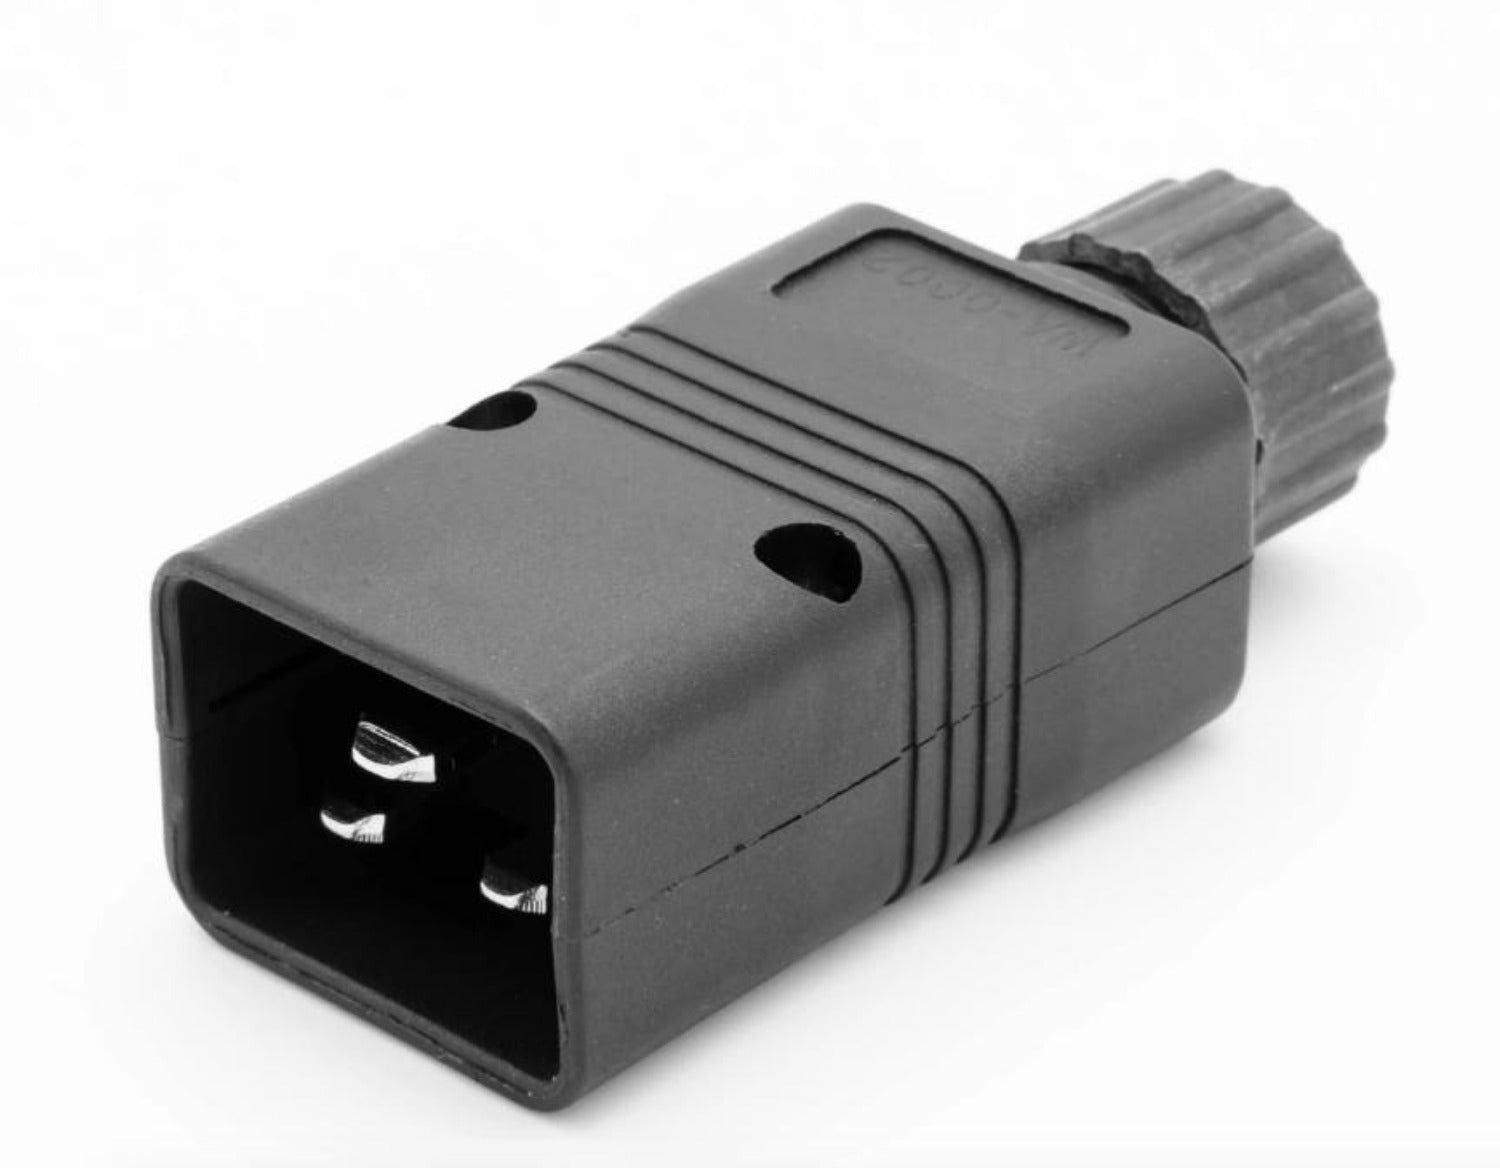 Re-wireable inline plug